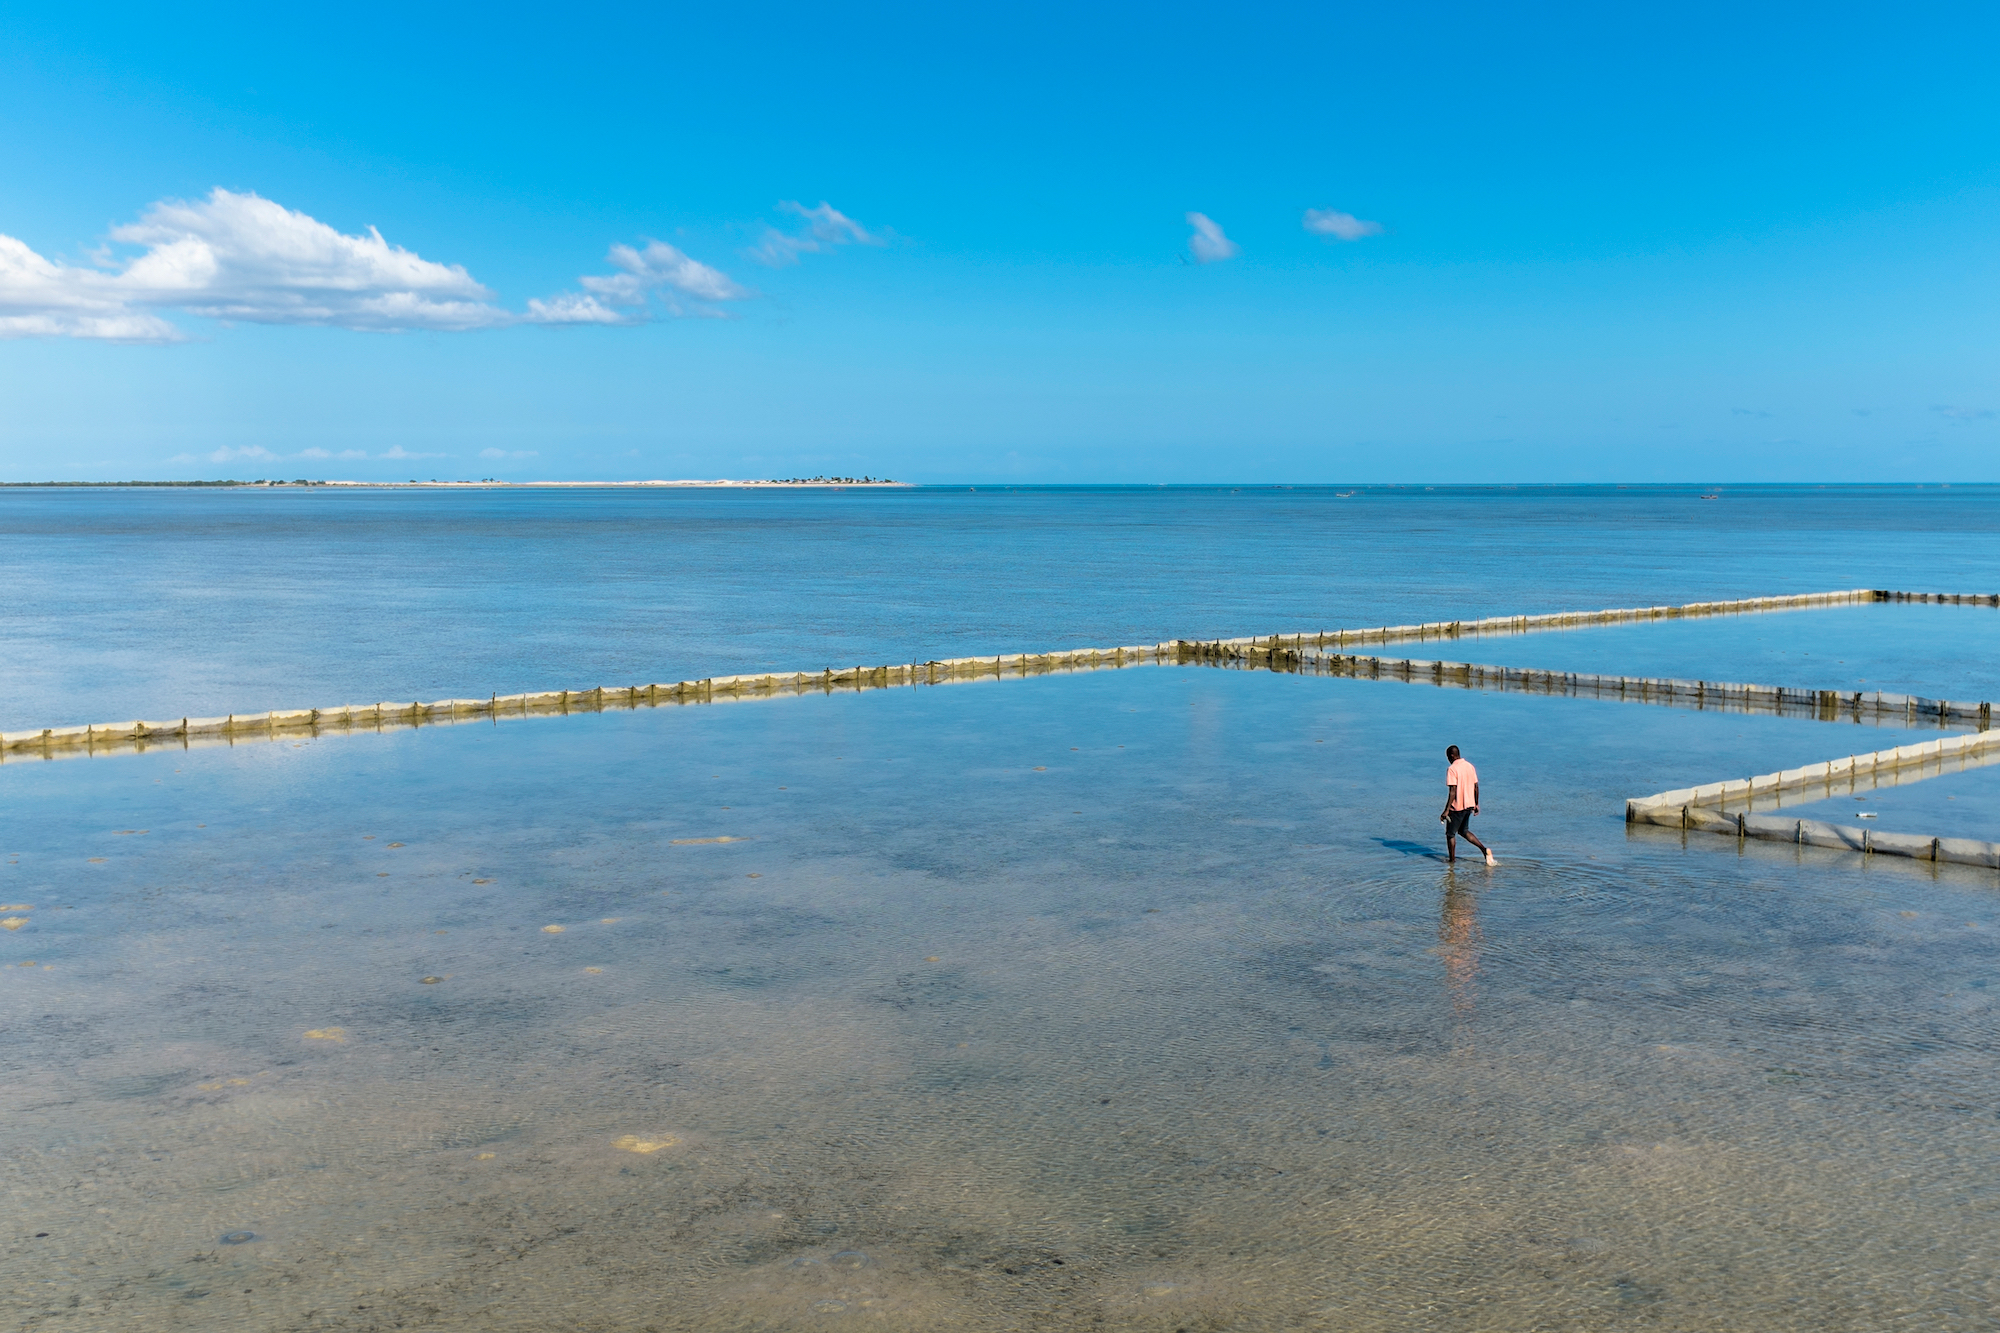 A Malagasi ranger patrols a sea cucumber farm on the coast - Photograph by Toby Smith